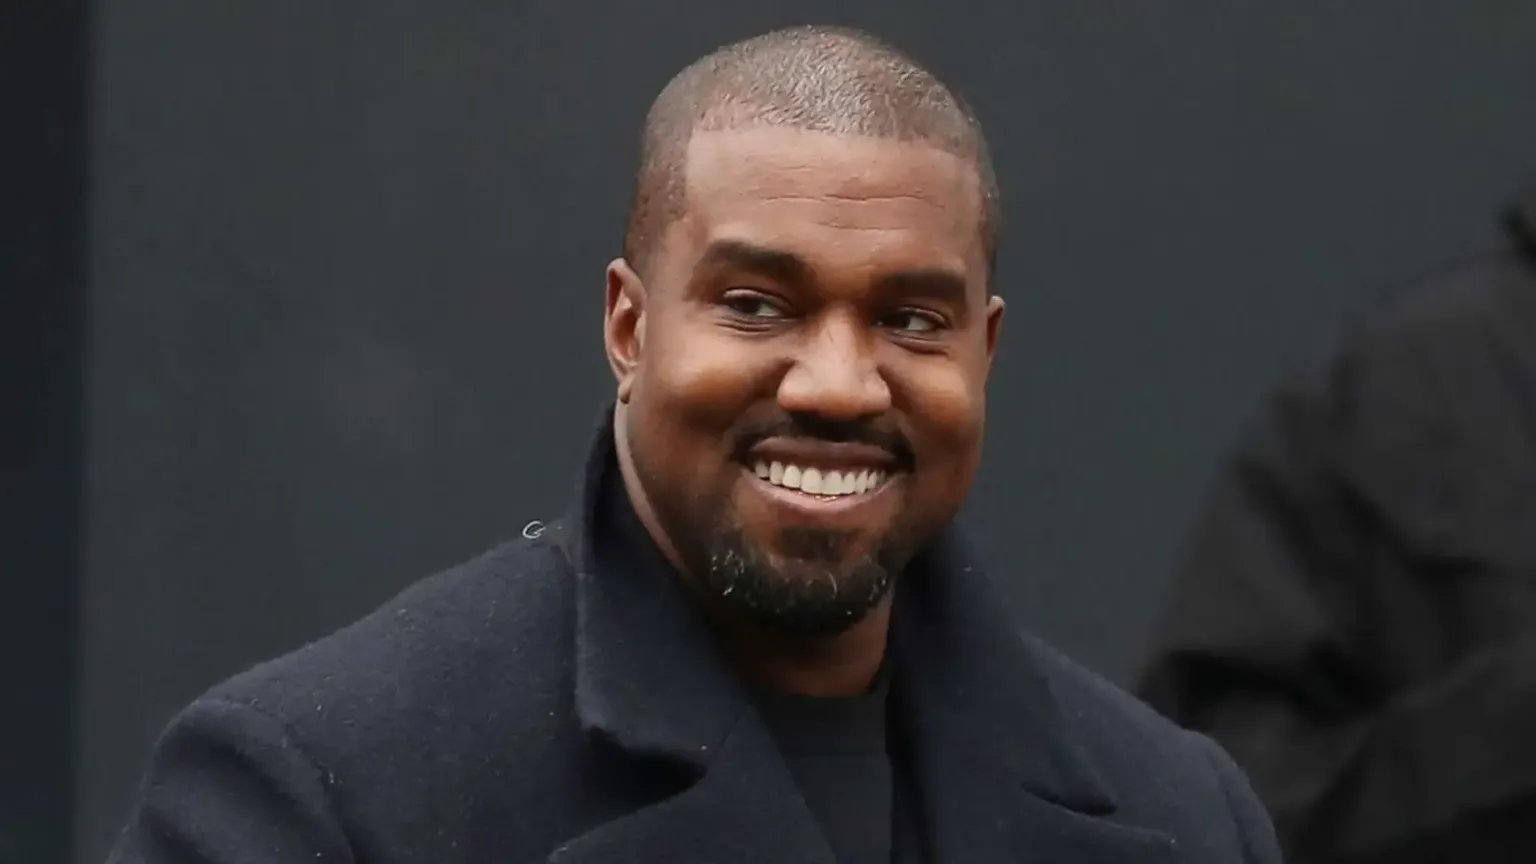 Kanye West’s Plan to Move Donda Academy To L.A Church Thwarted By Petitioners